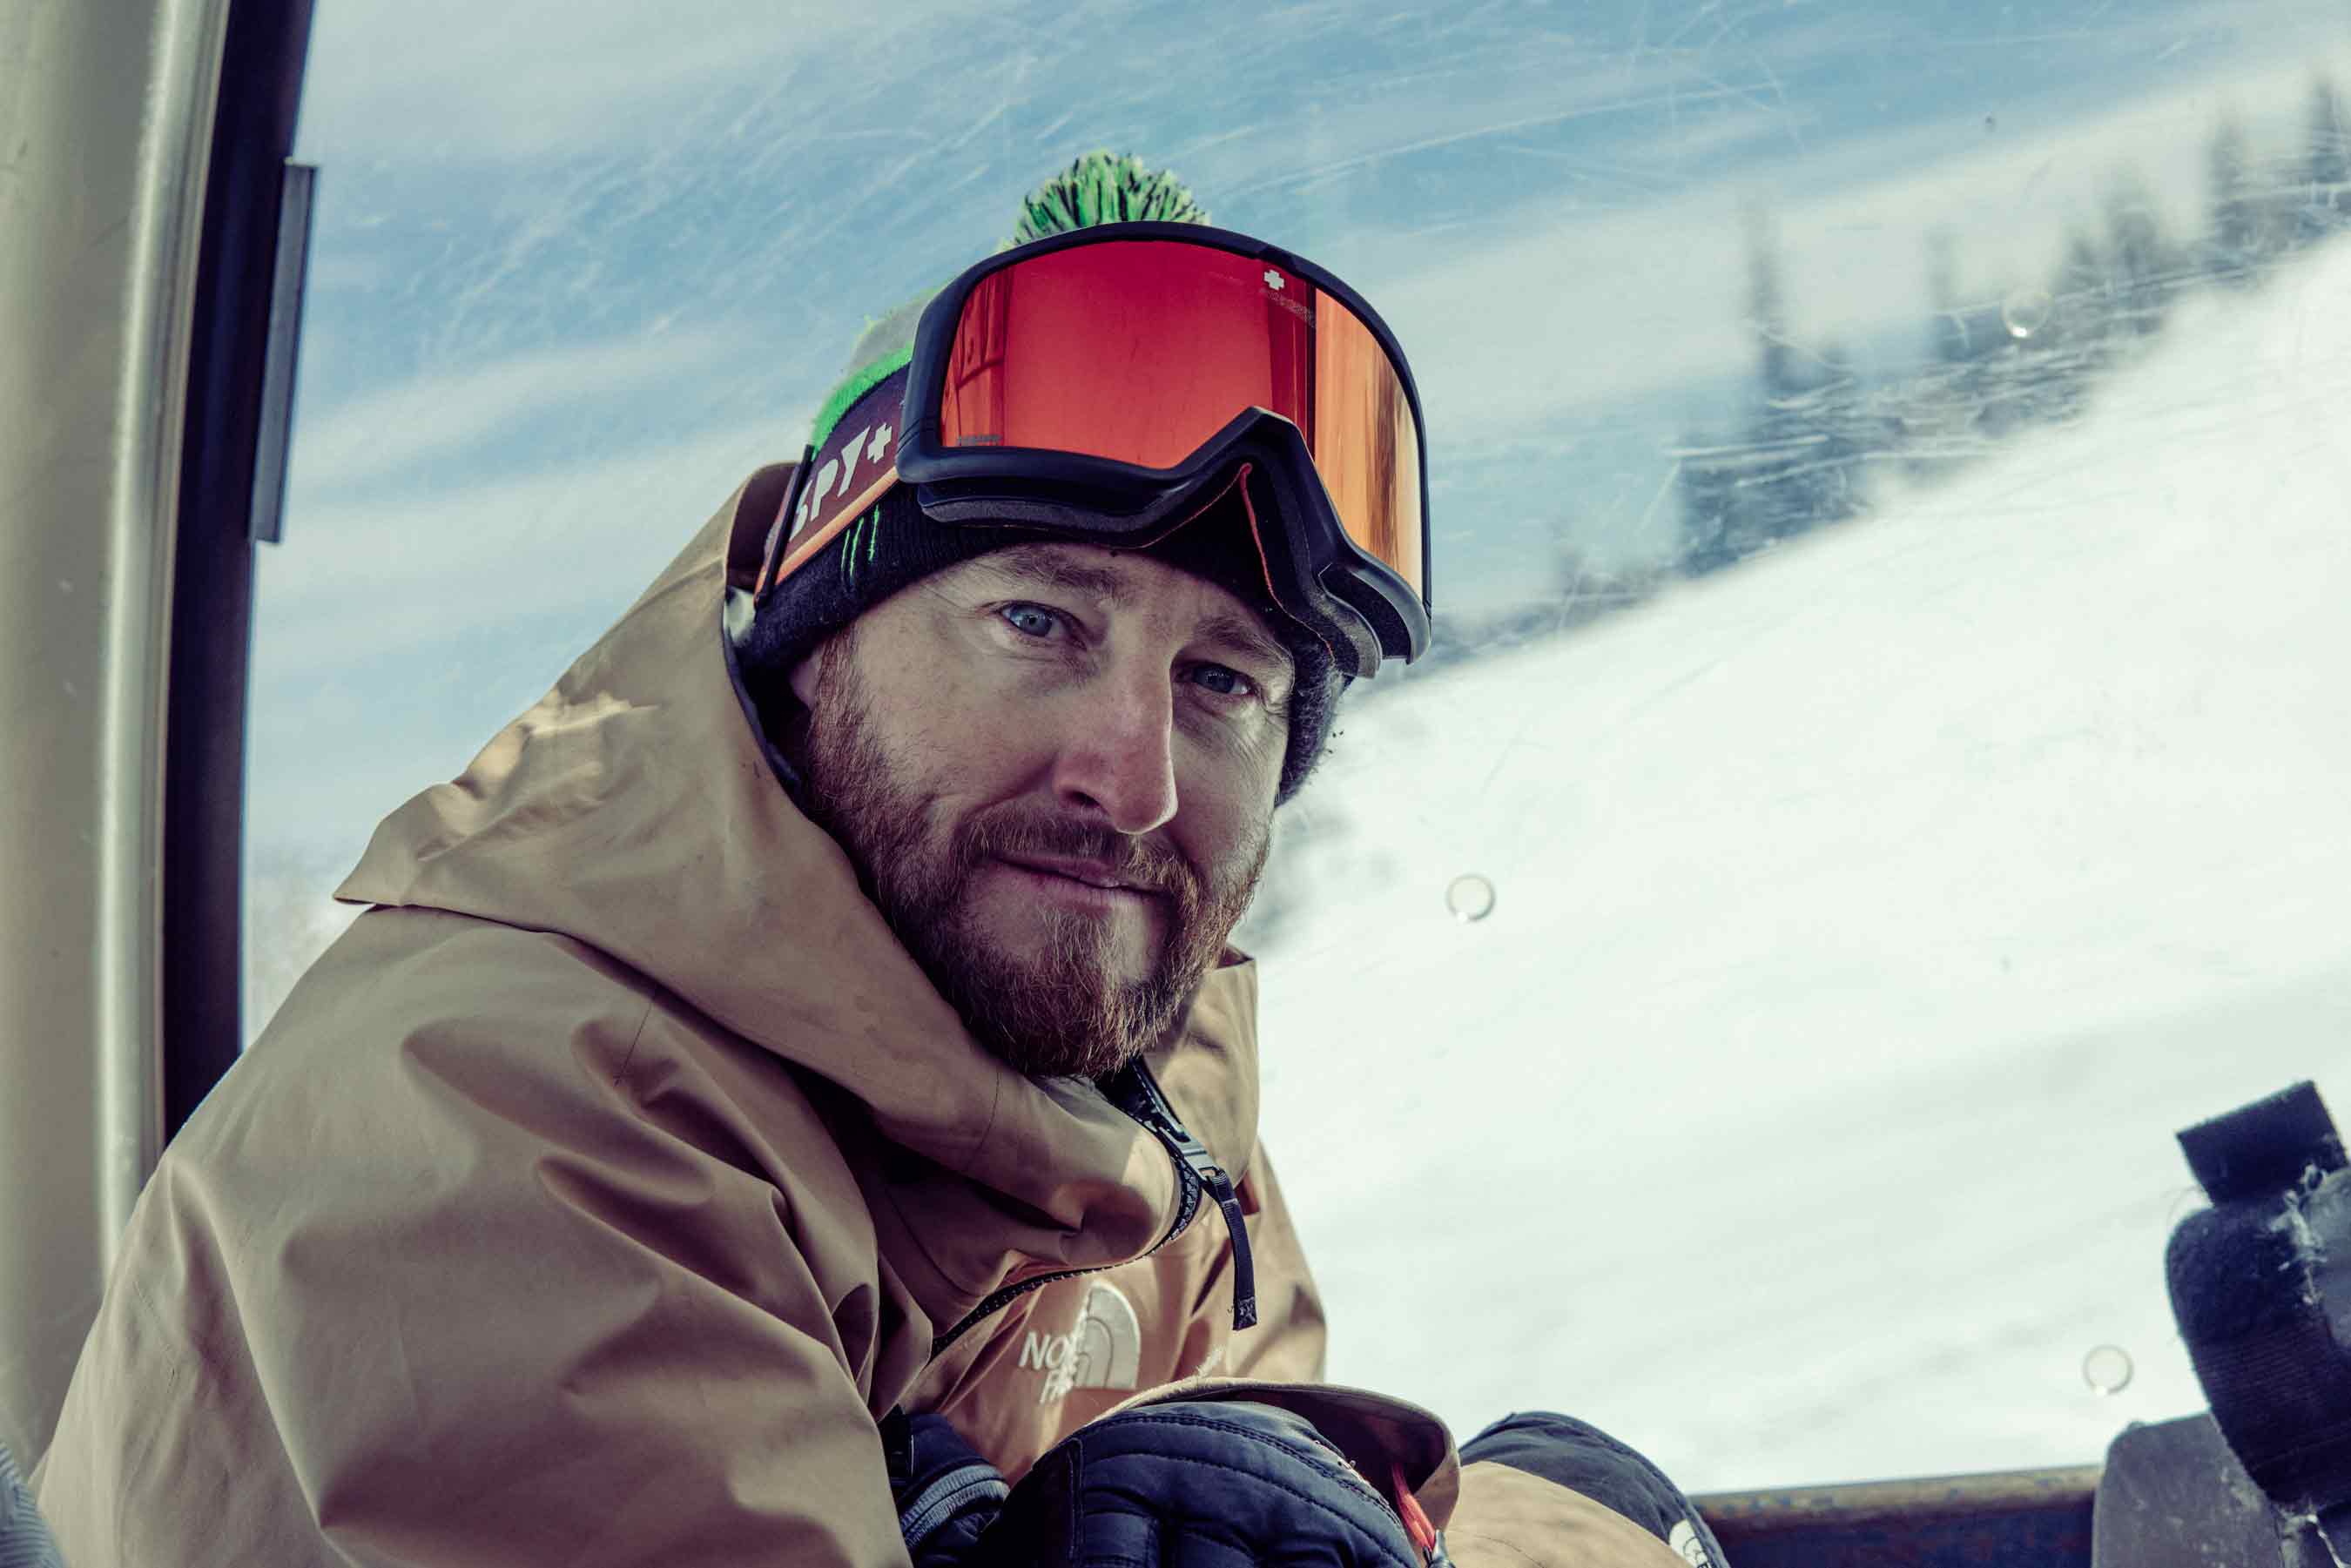 Tom Wallisch wearing the Megalith Snow Goggle in Mammoth